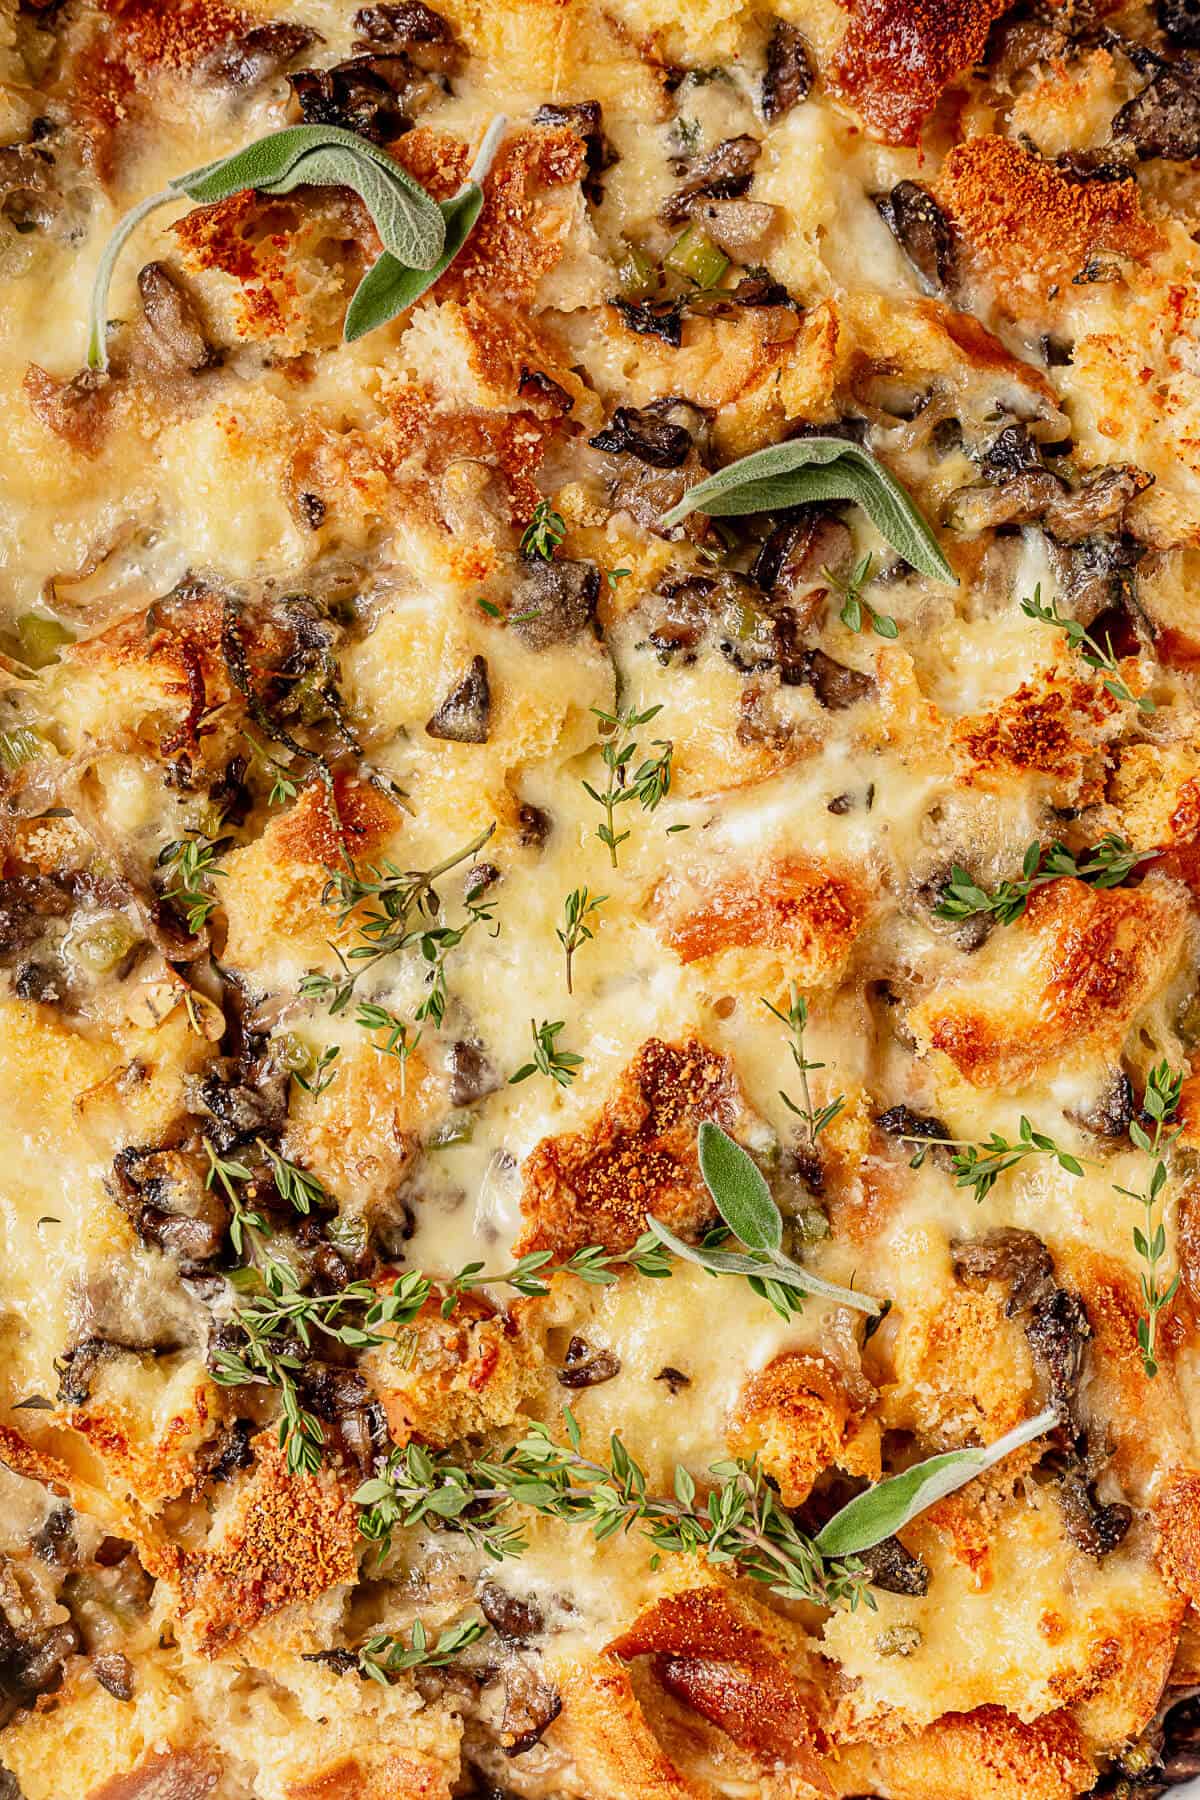 the cheesy golden brown top of a savory bread pudding showing the mushrooms and herms throughout